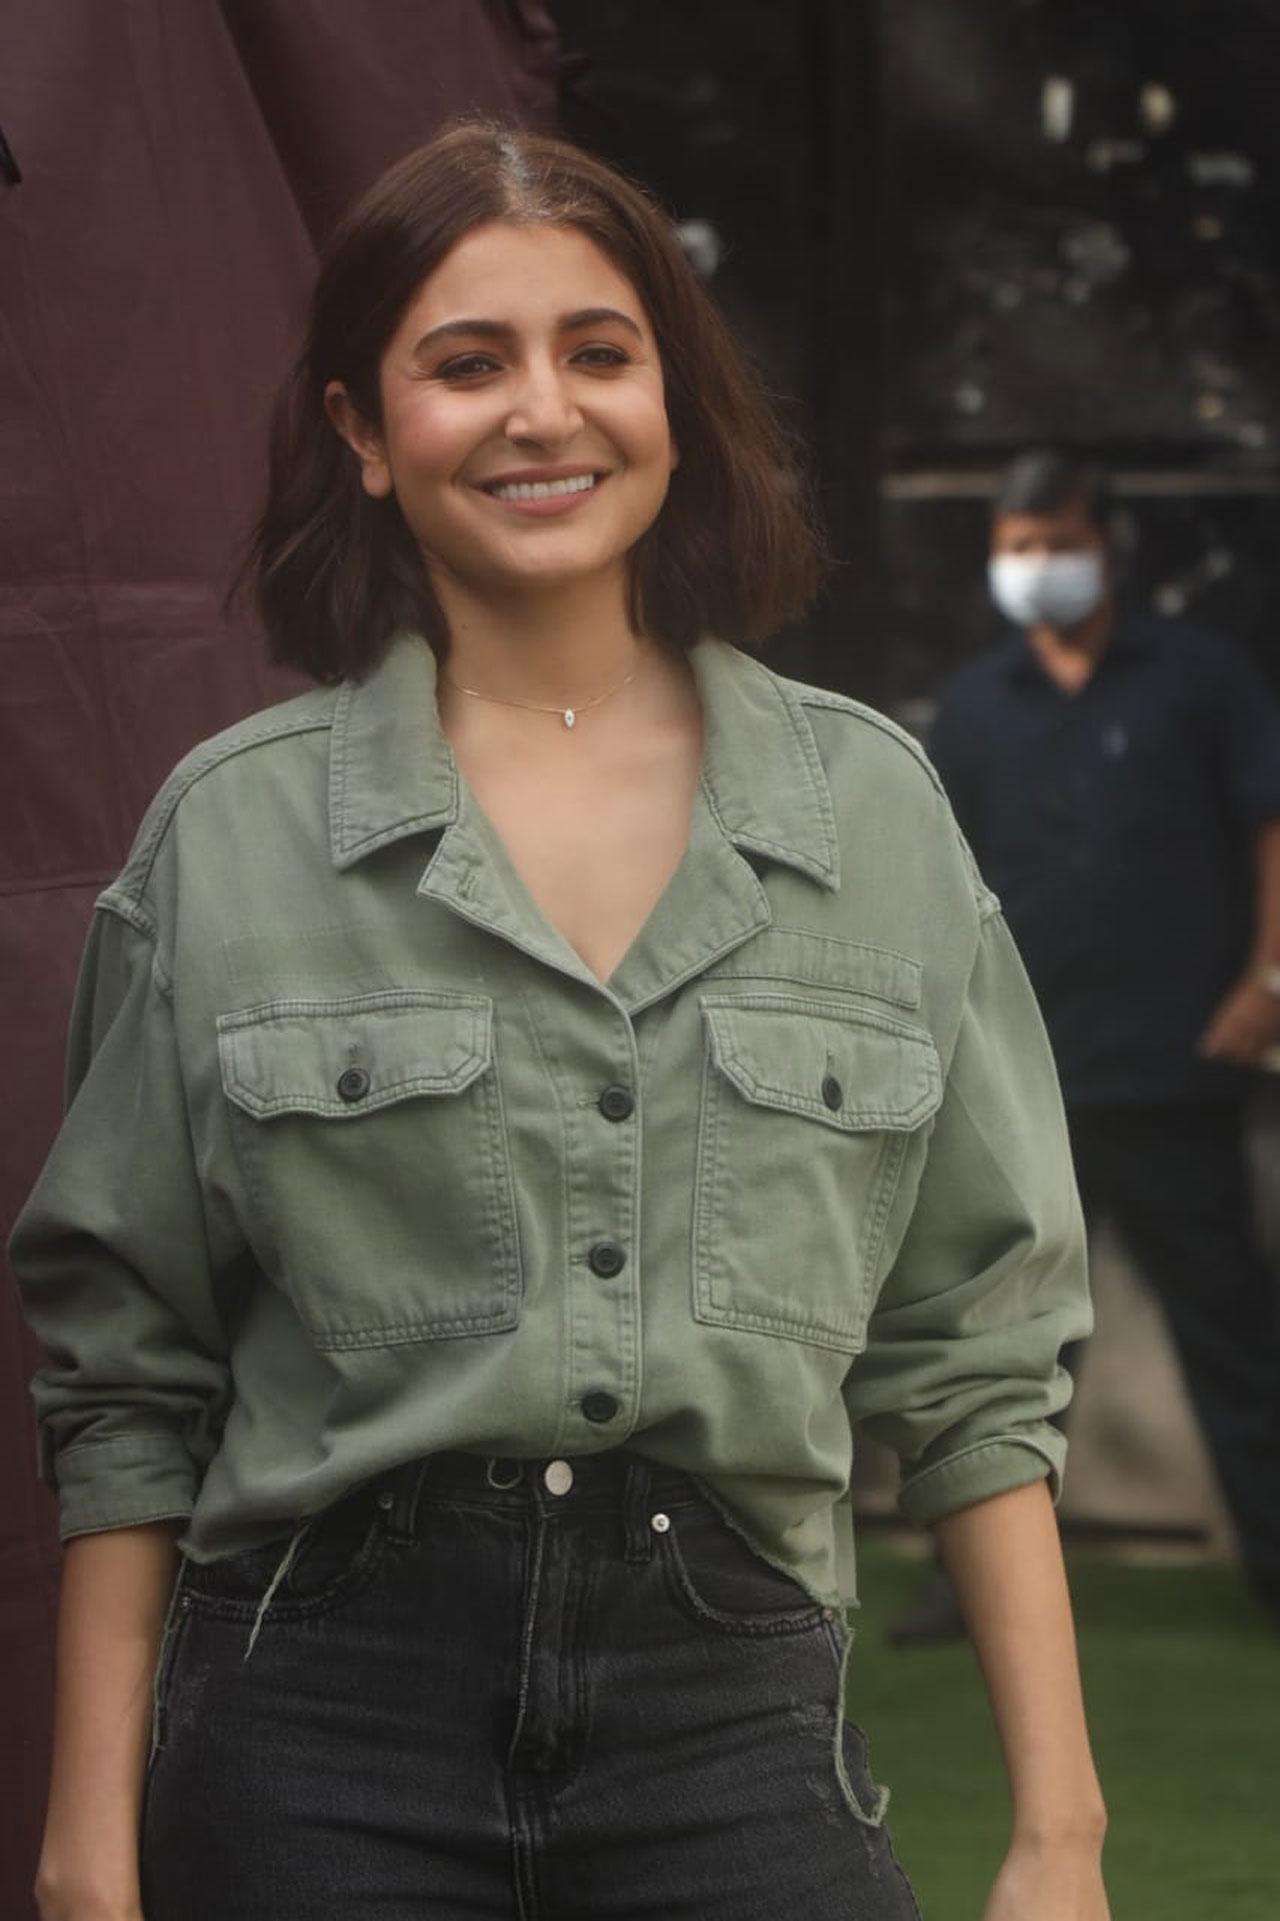 Anushka Sharma has always made a statement with her fashion choices, and even with her new mom fashion choices, she has been setting breezy chic fashion goals.